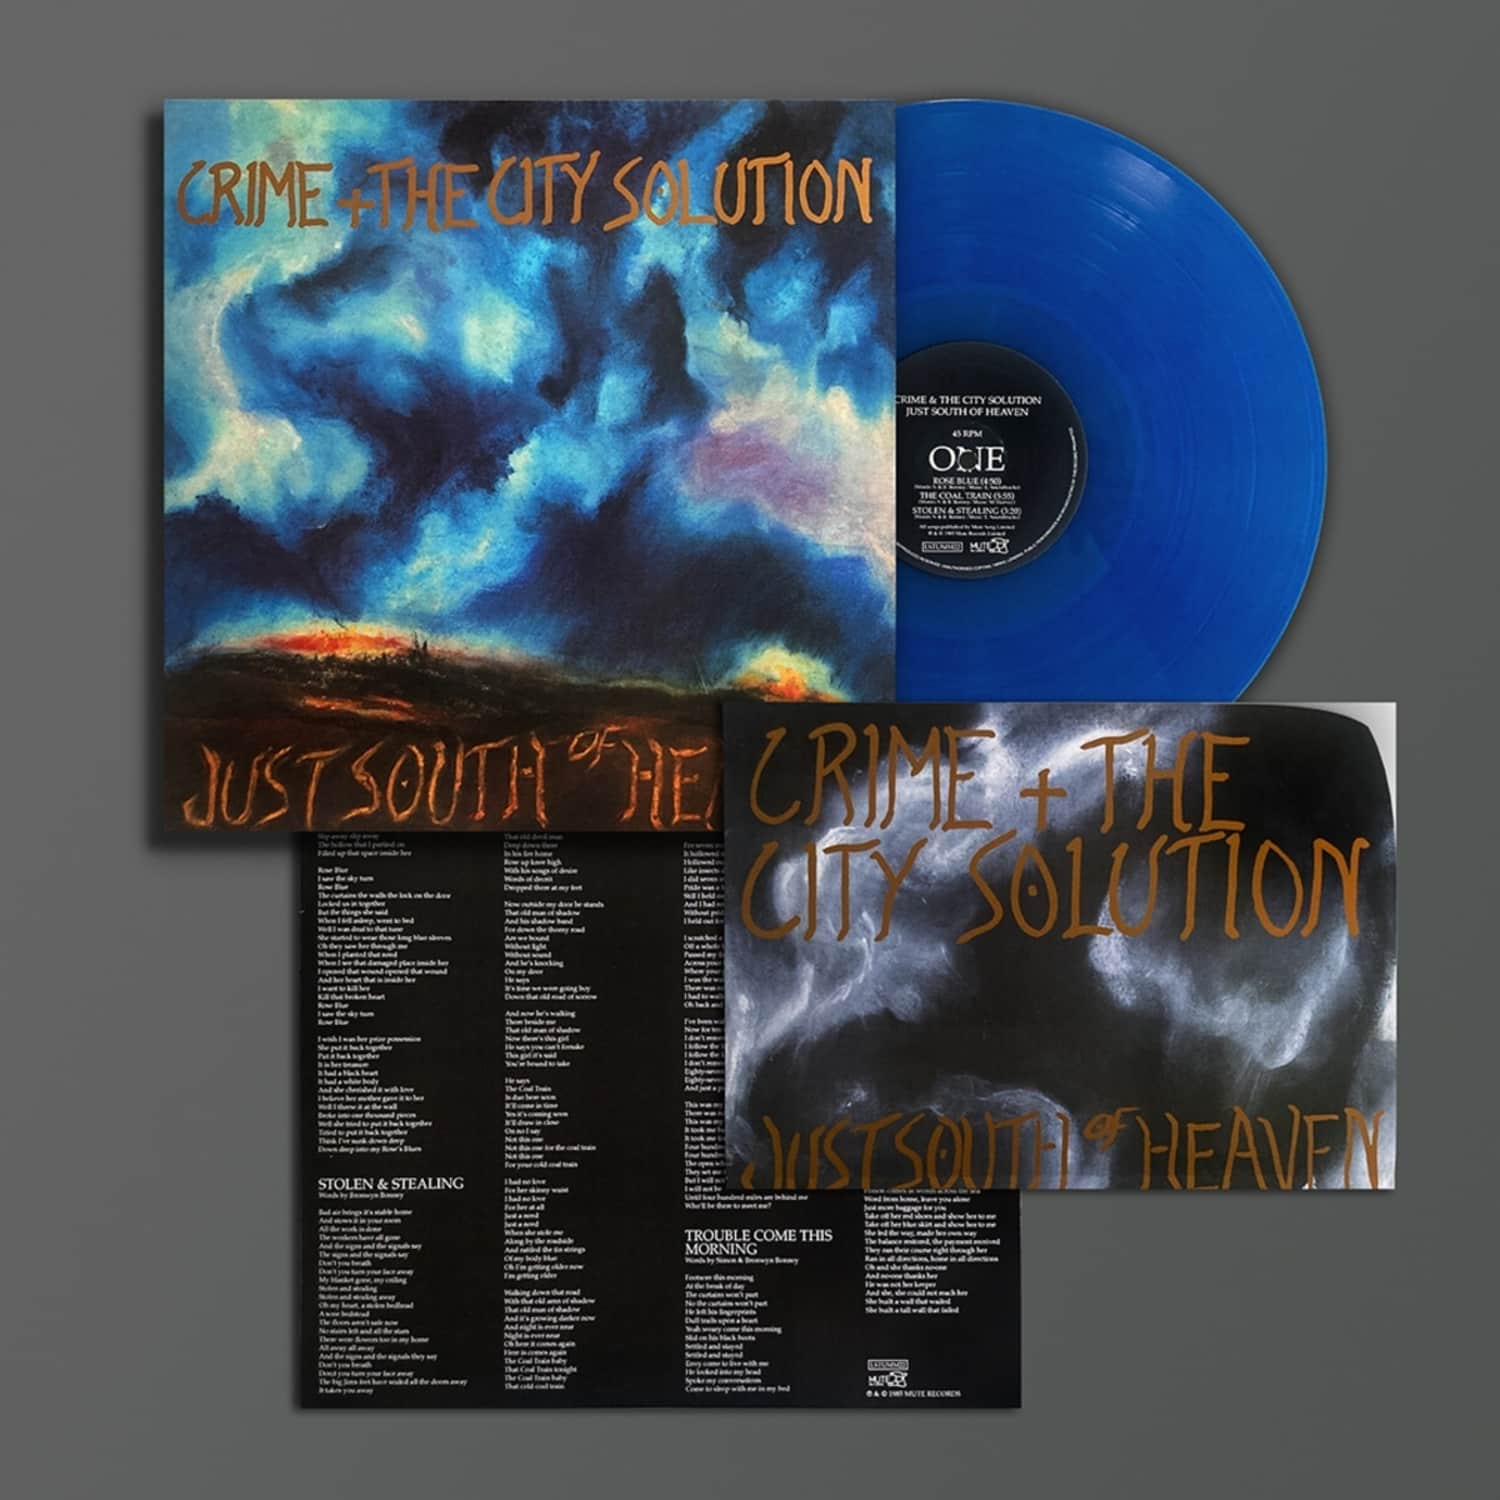 Crime & The City Solution - JUST SOUTH OF HEAVEN 